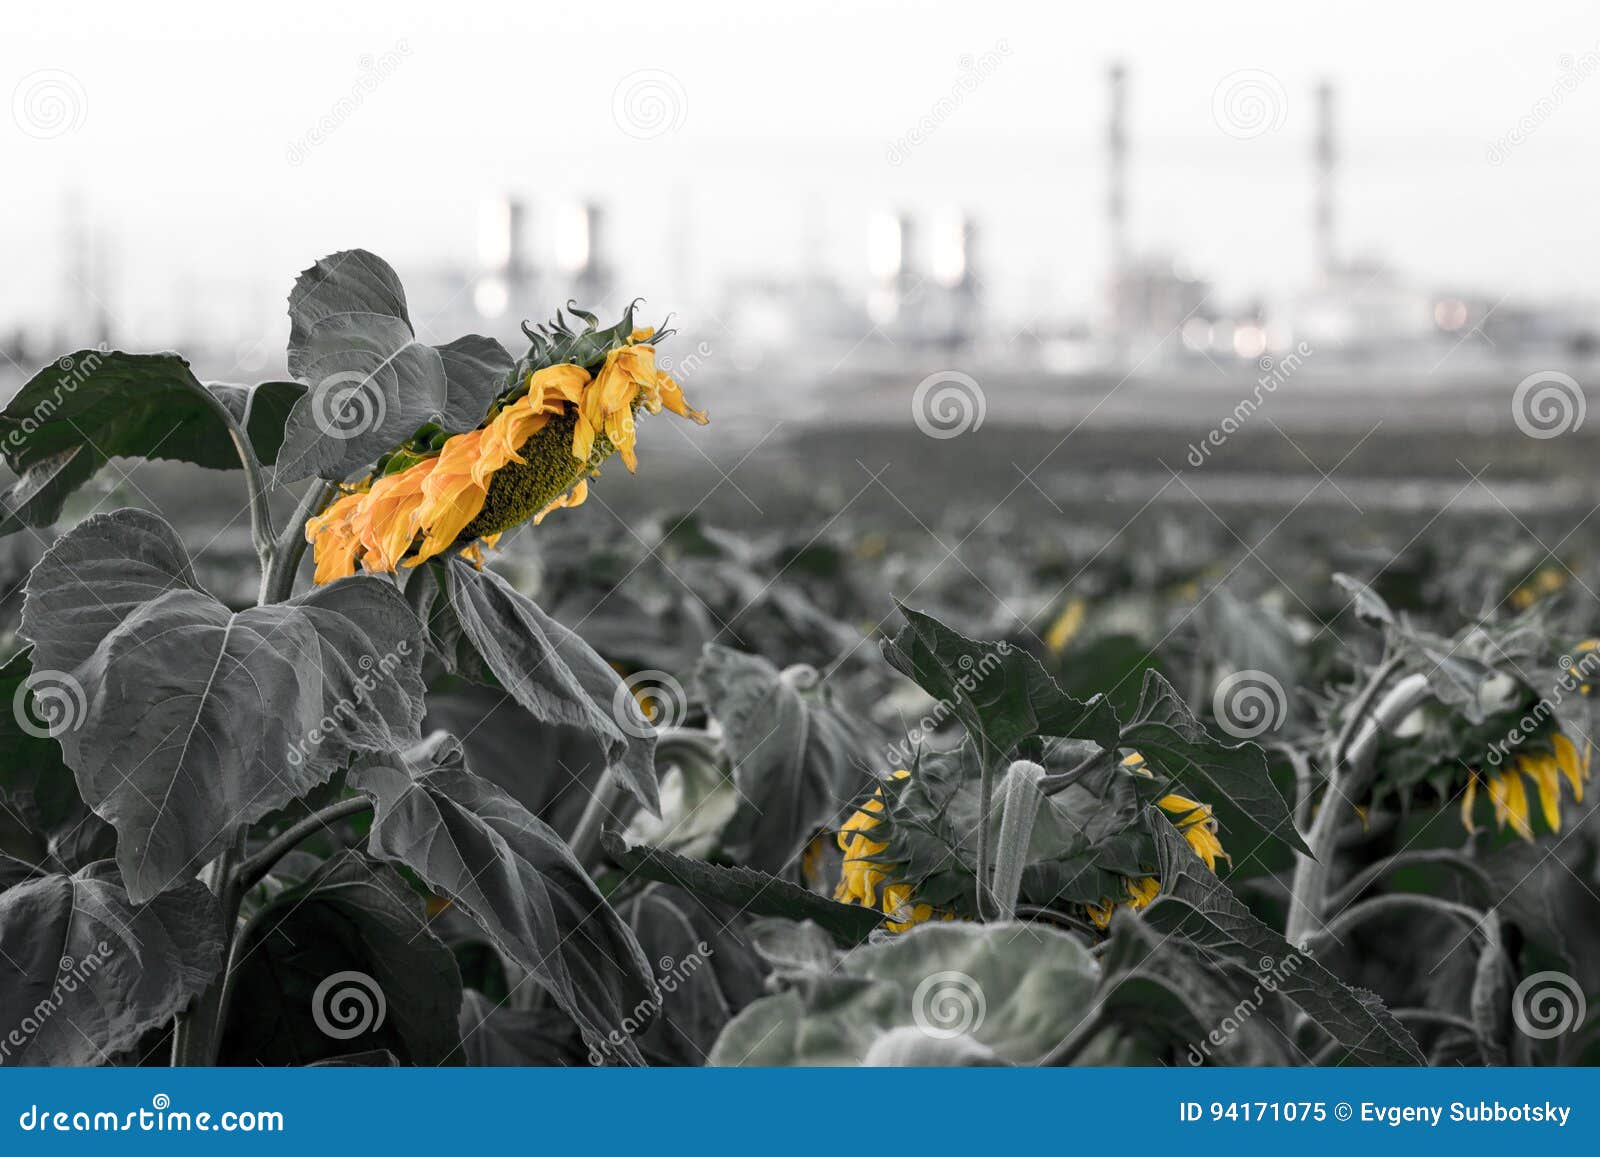 Withered Sunflowers Field Industrial Chimney Smoking Environment Stock